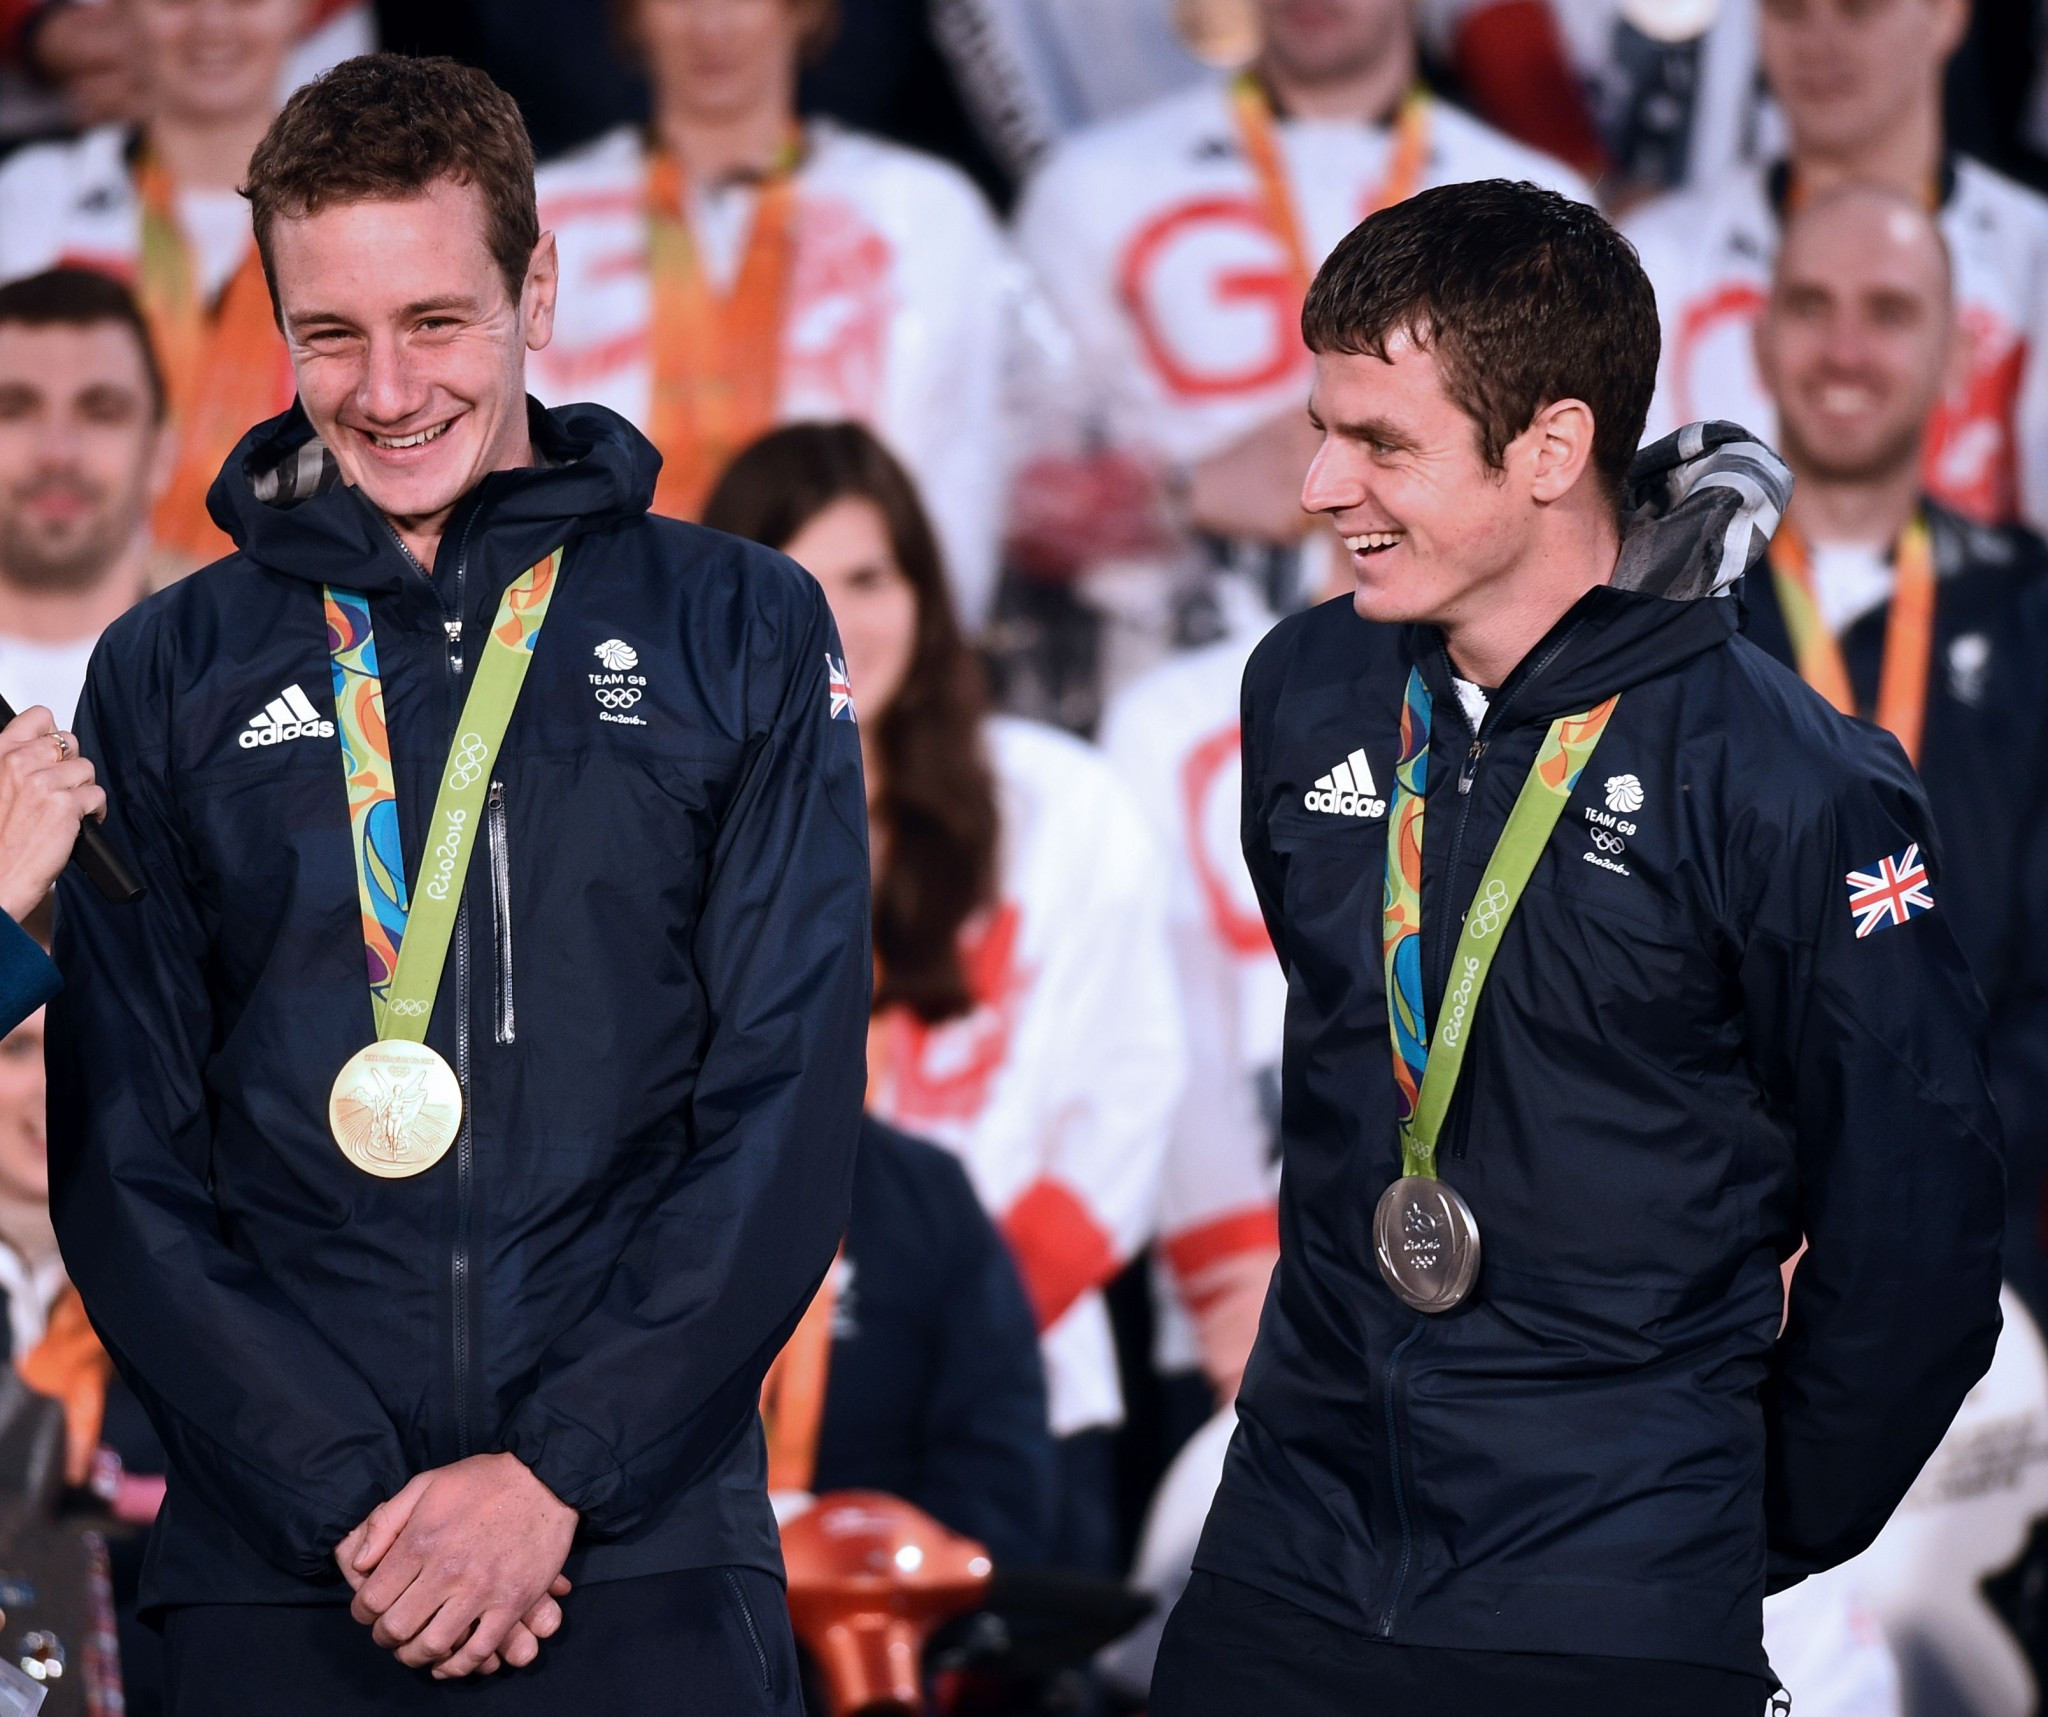 Alistair Brownlee and his younger brother Jonny won gold and silver medals at Rio 2016 ©Getty Images